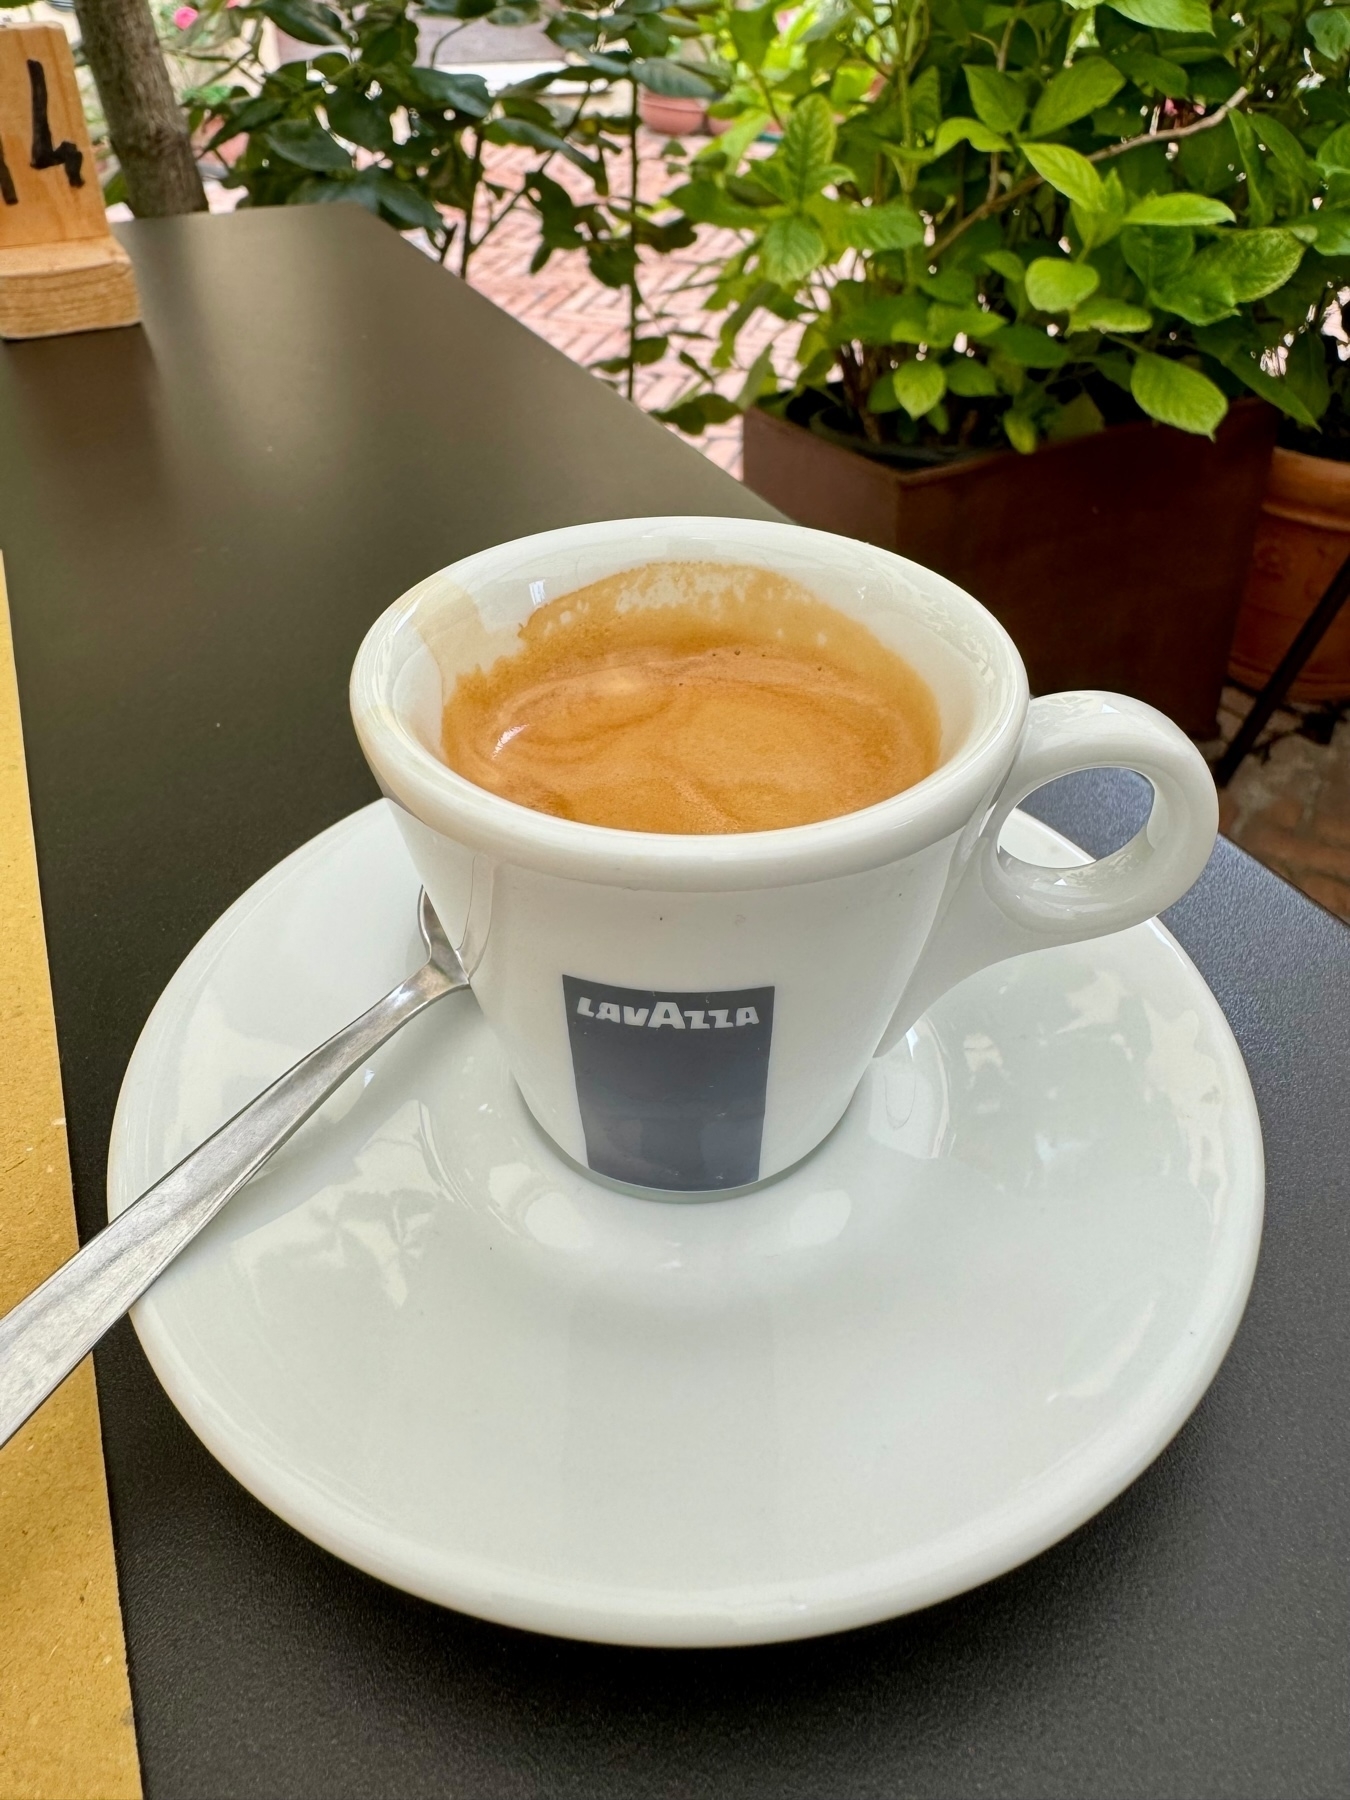 A Lavazza-branded white espresso cup and saucer filled with espresso, placed on a table. A metal spoon rests on the saucer. In the background, there are green plants and a wooden table number stand with the number 14.